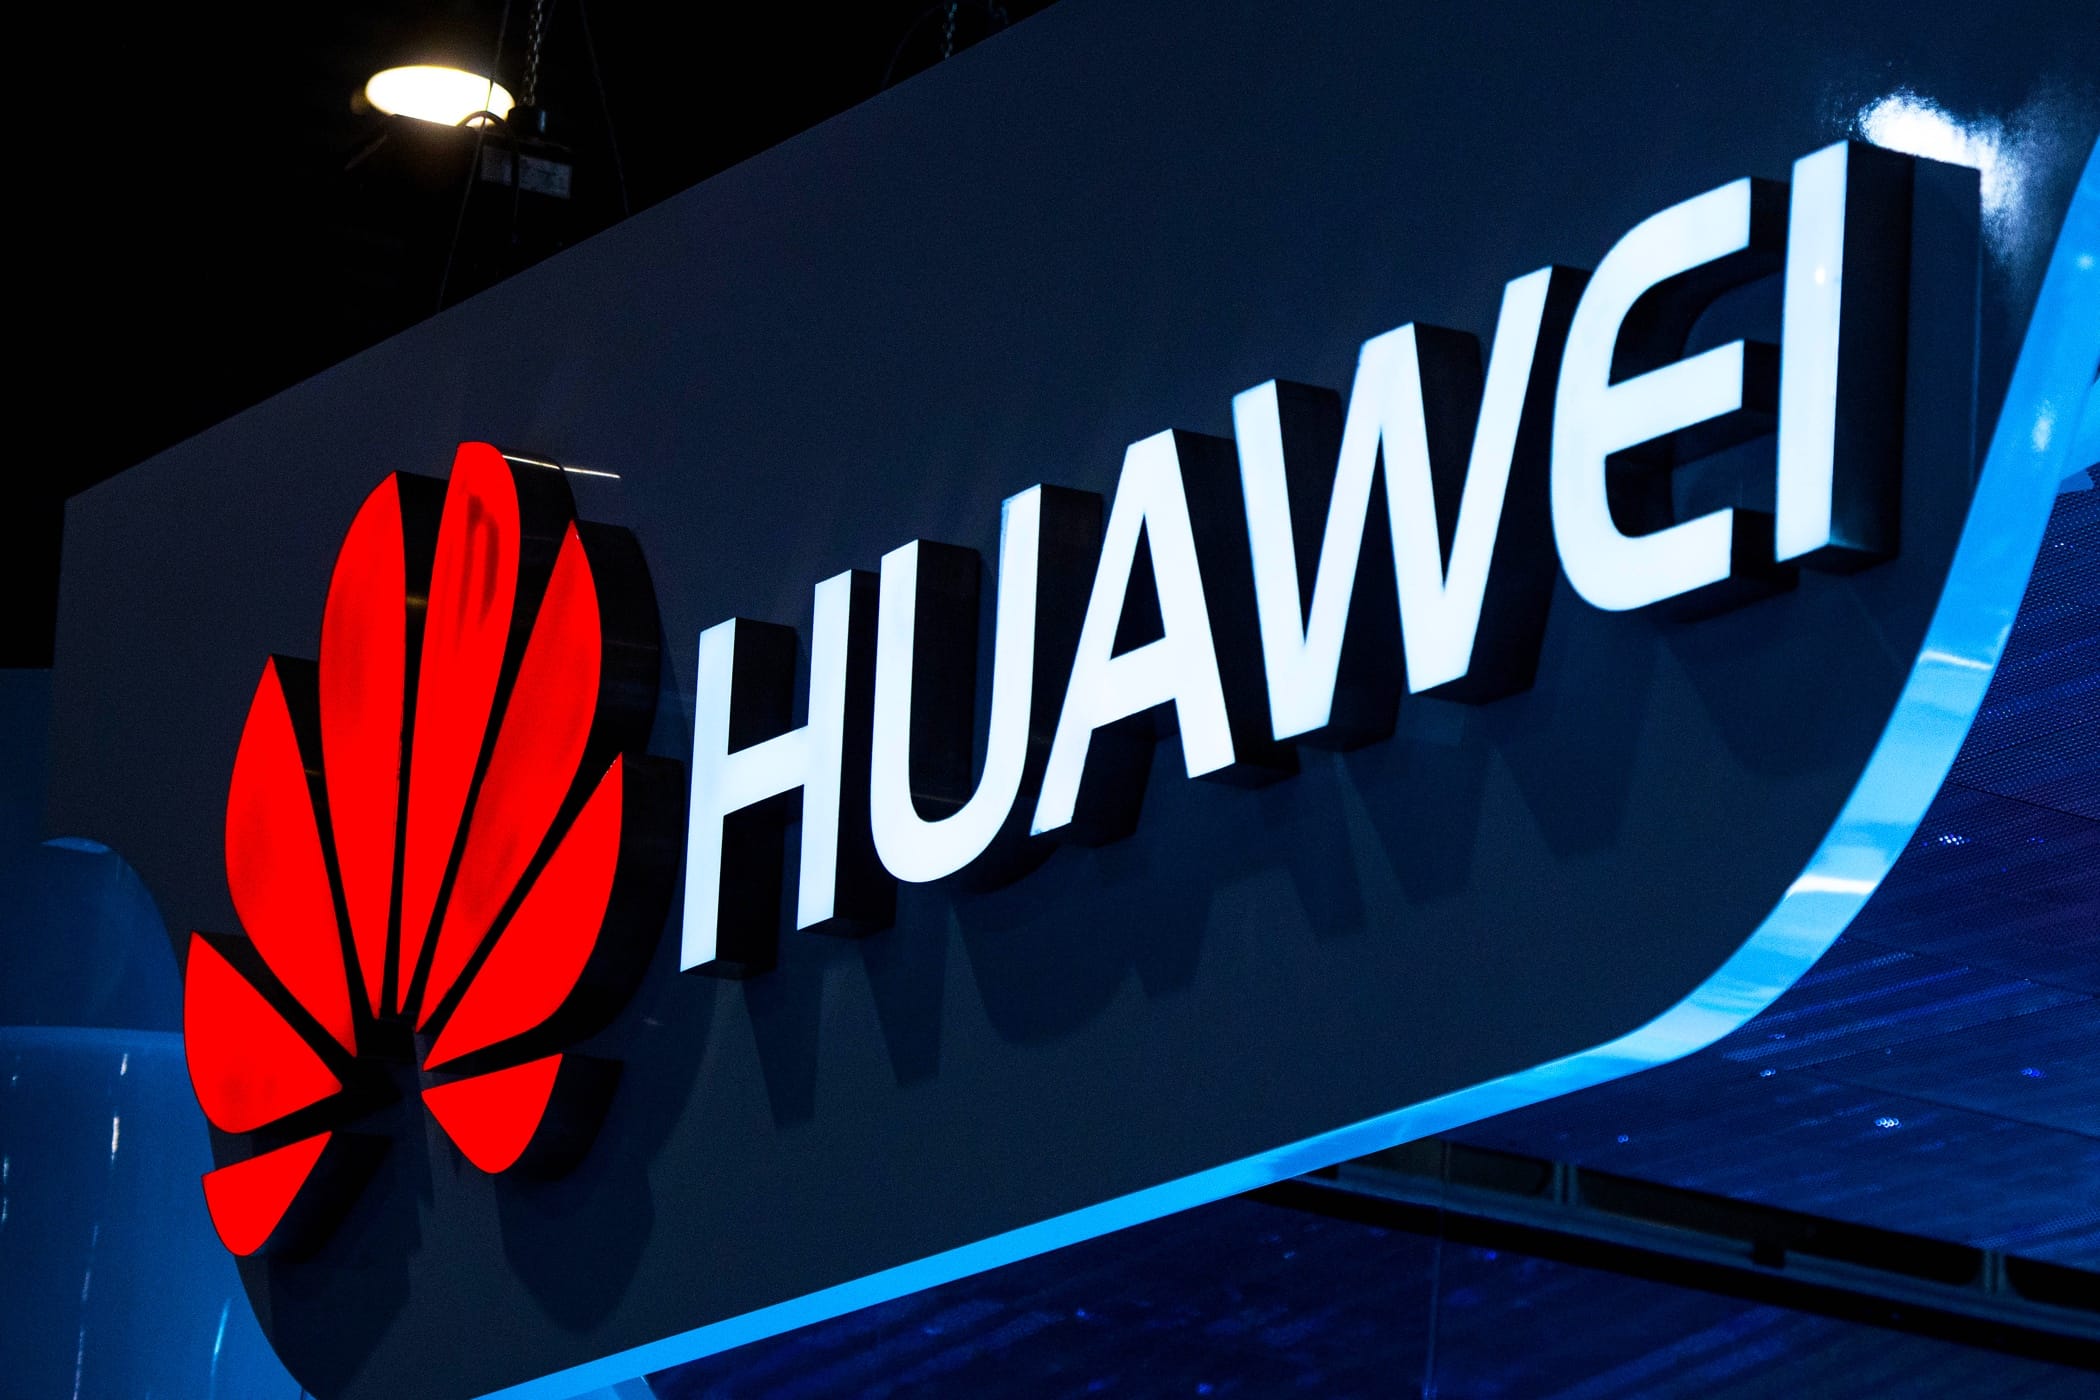 Bloomberg: Huawei has found a way to circumvent U.S. sanctions, the company will license its smartphones to partners